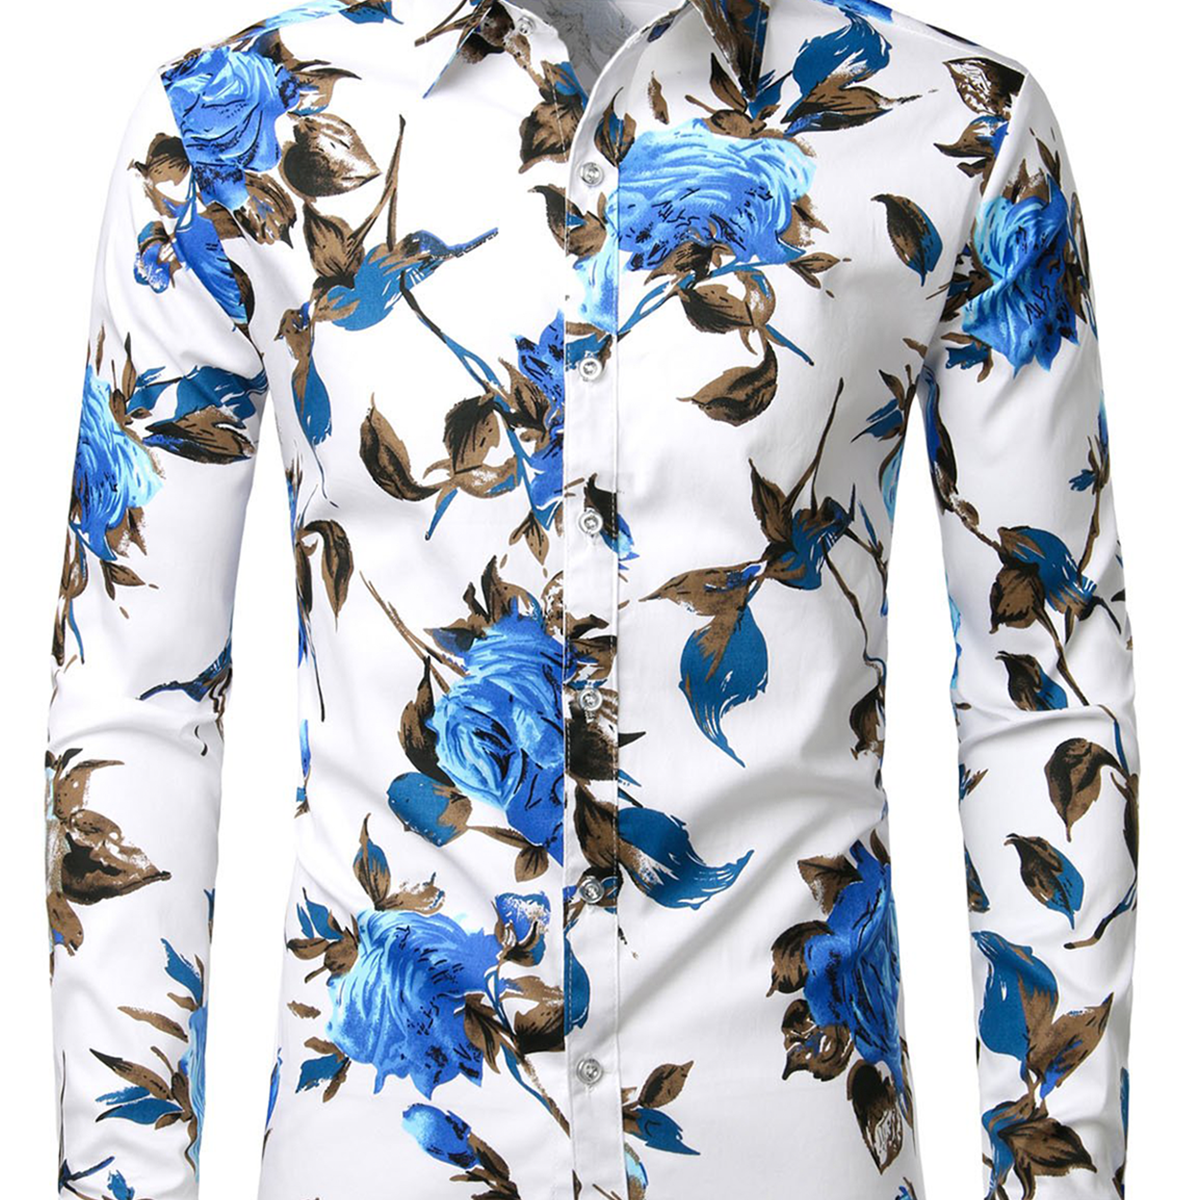 Men's Floral Long Sleeve Animal Print Cotton Casual Button Up Shirt